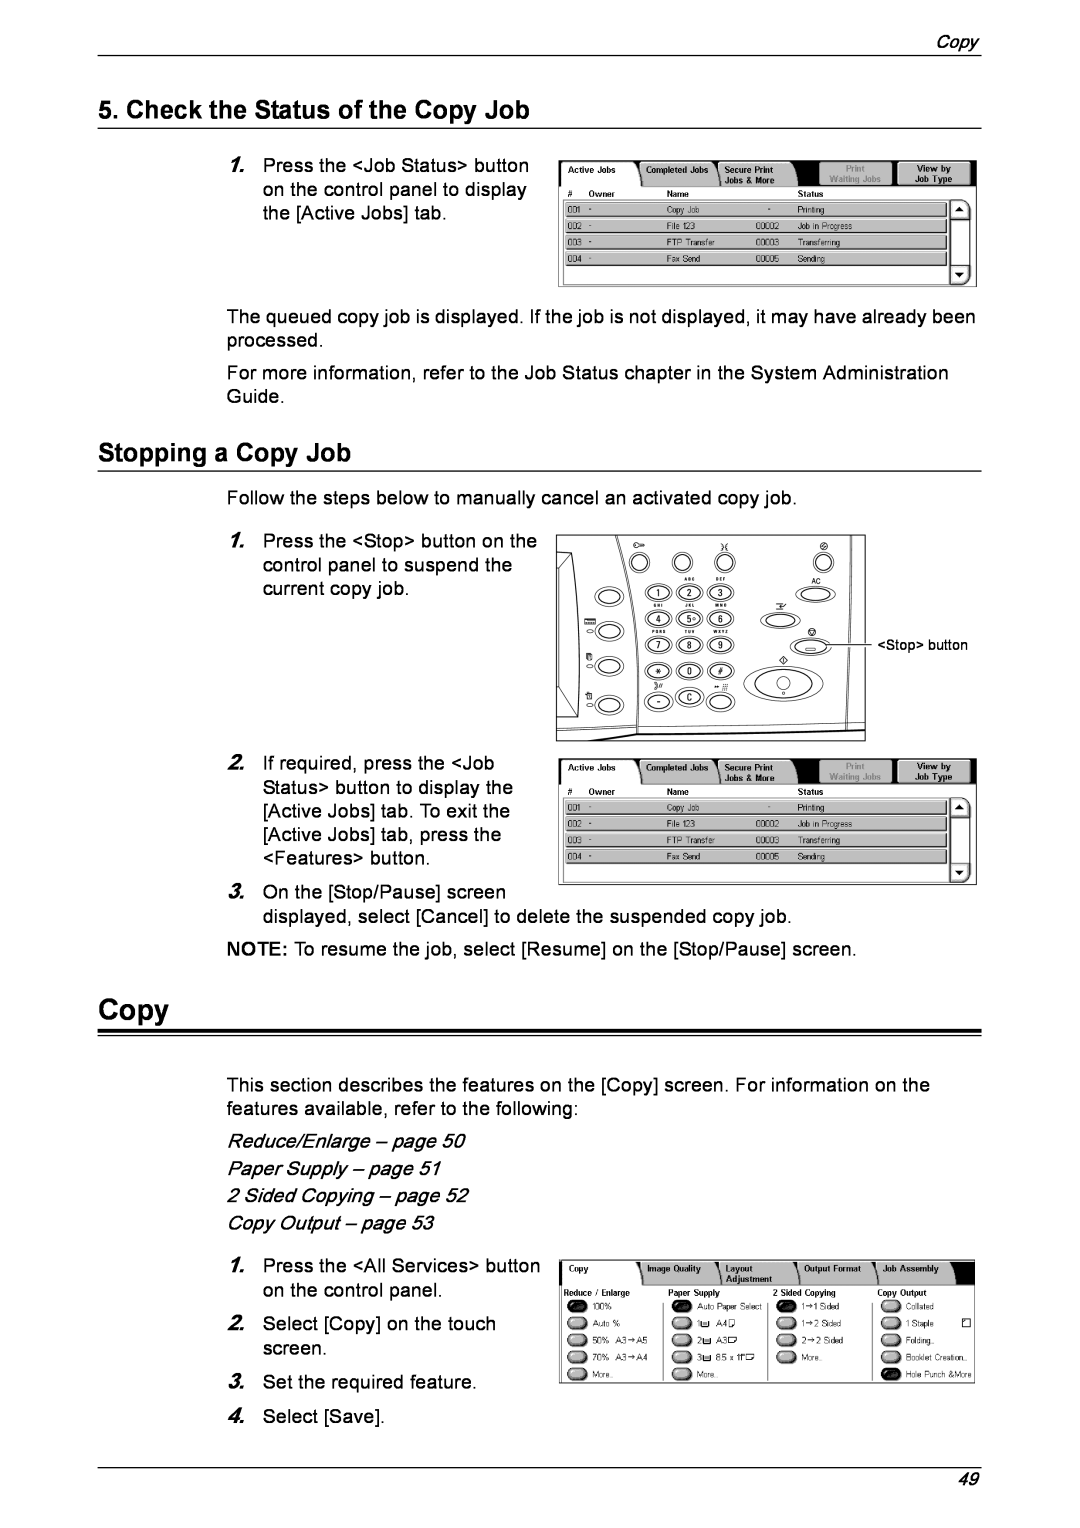 Xerox 5230 manual Check the Status of the Copy Job, Stopping a Copy Job, Reduce/Enlarge – page 50 Paper Supply – page 